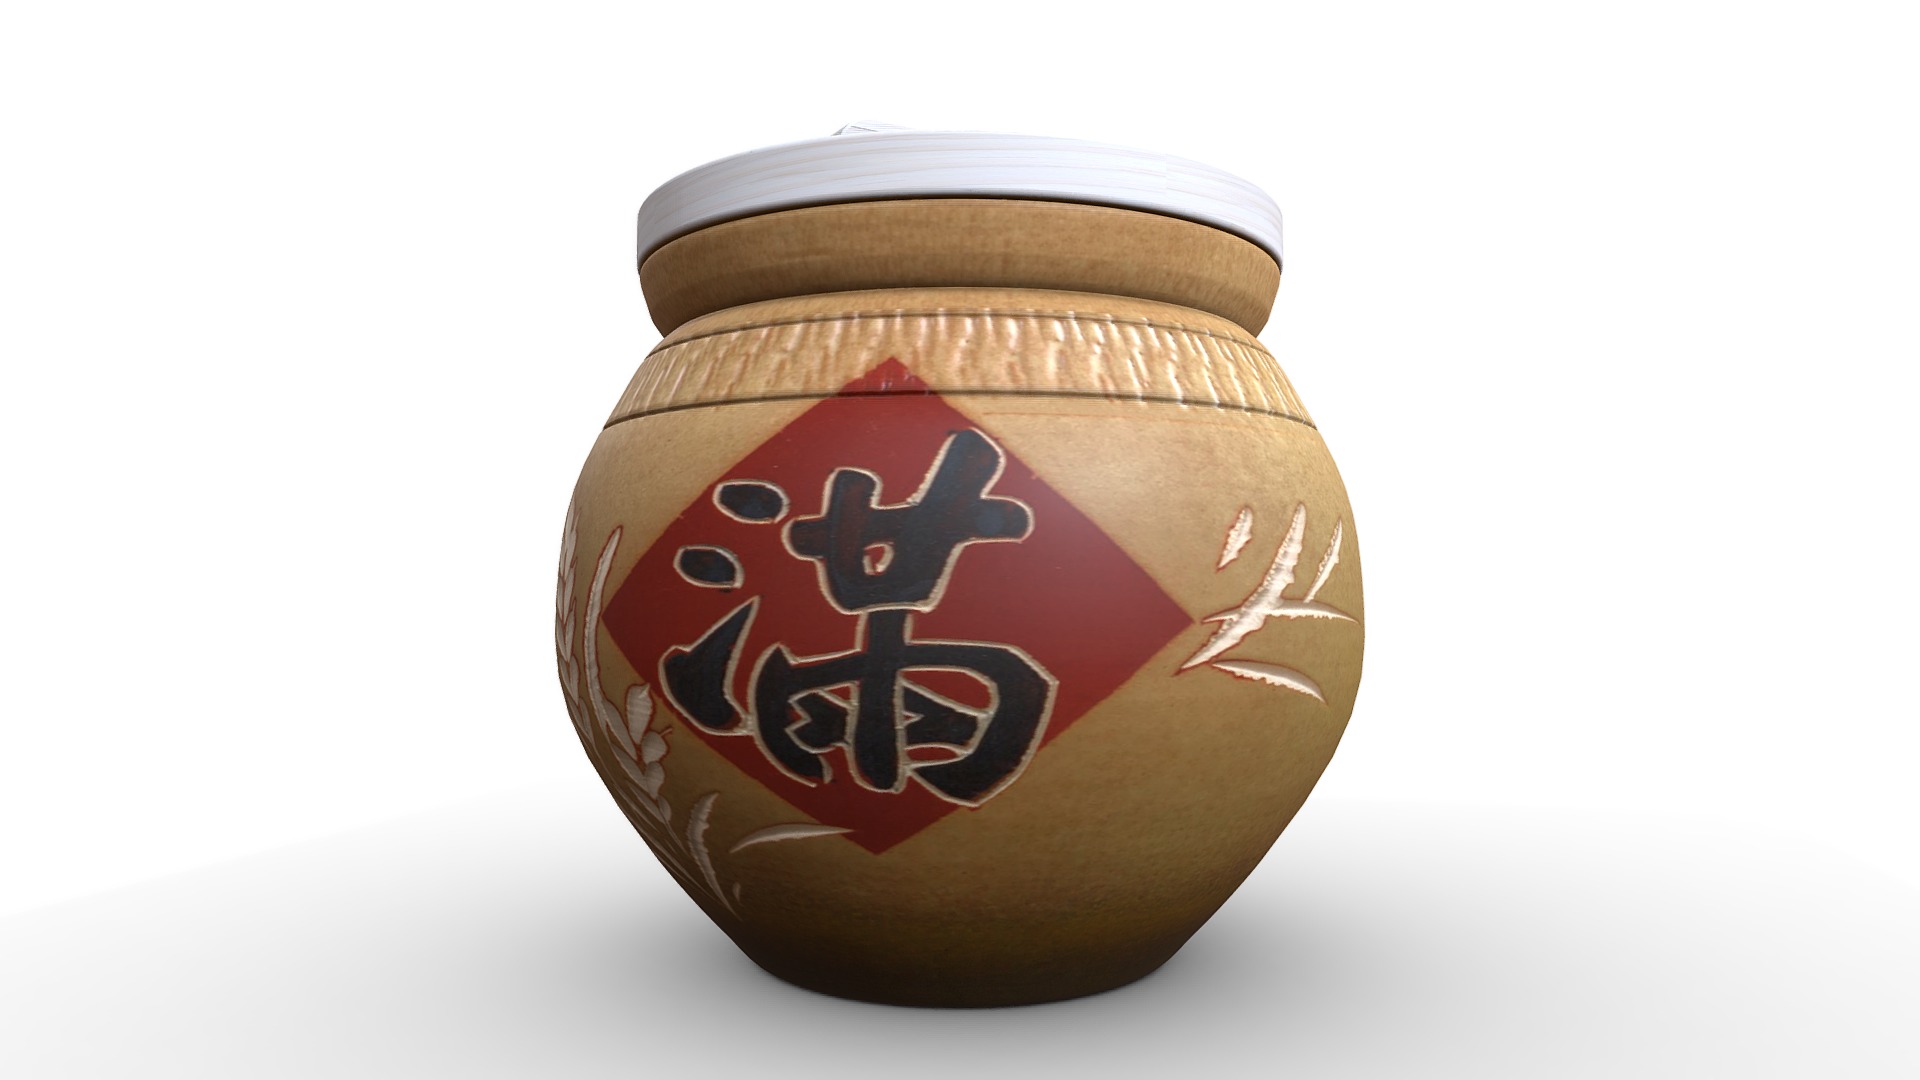 3D model 【3D模擬-上等】10斤土黃『 稻穗 』米甕展示 - This is a 3D model of the 【3D模擬-上等】10斤土黃『 稻穗 』米甕展示. The 3D model is about a brown and white container.